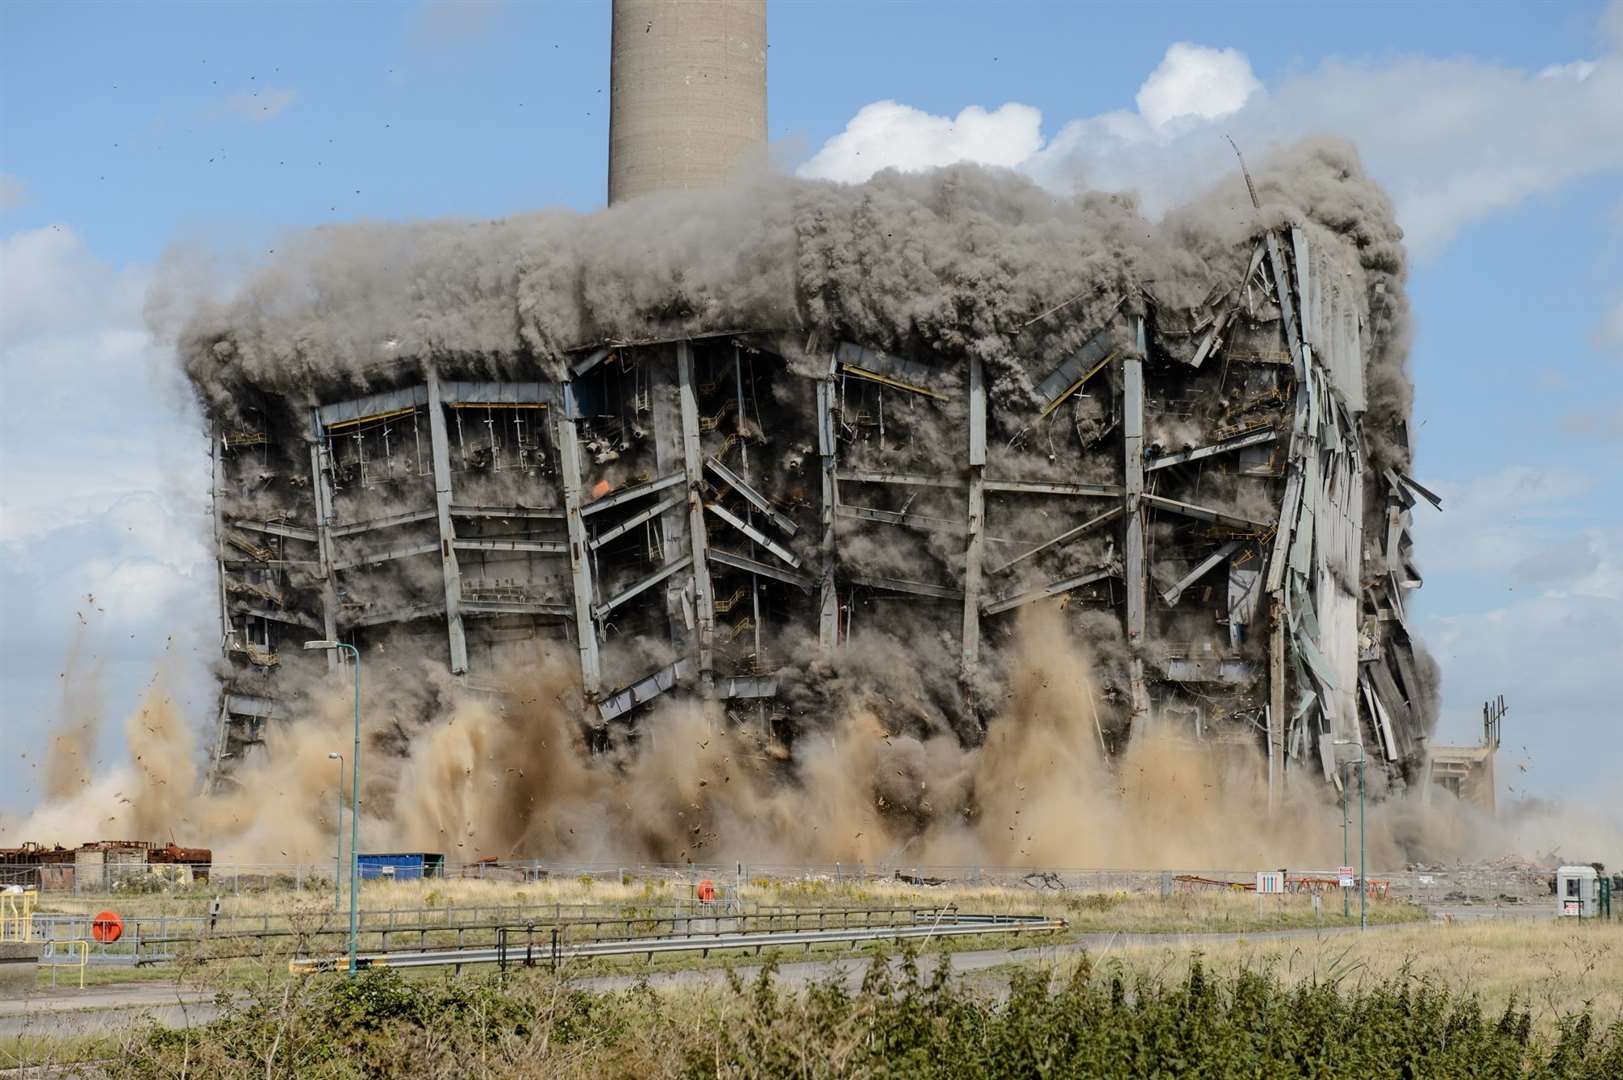 The demolition of the boiler houses at Kingsnorth power station in July, carried out by Brown and Mason